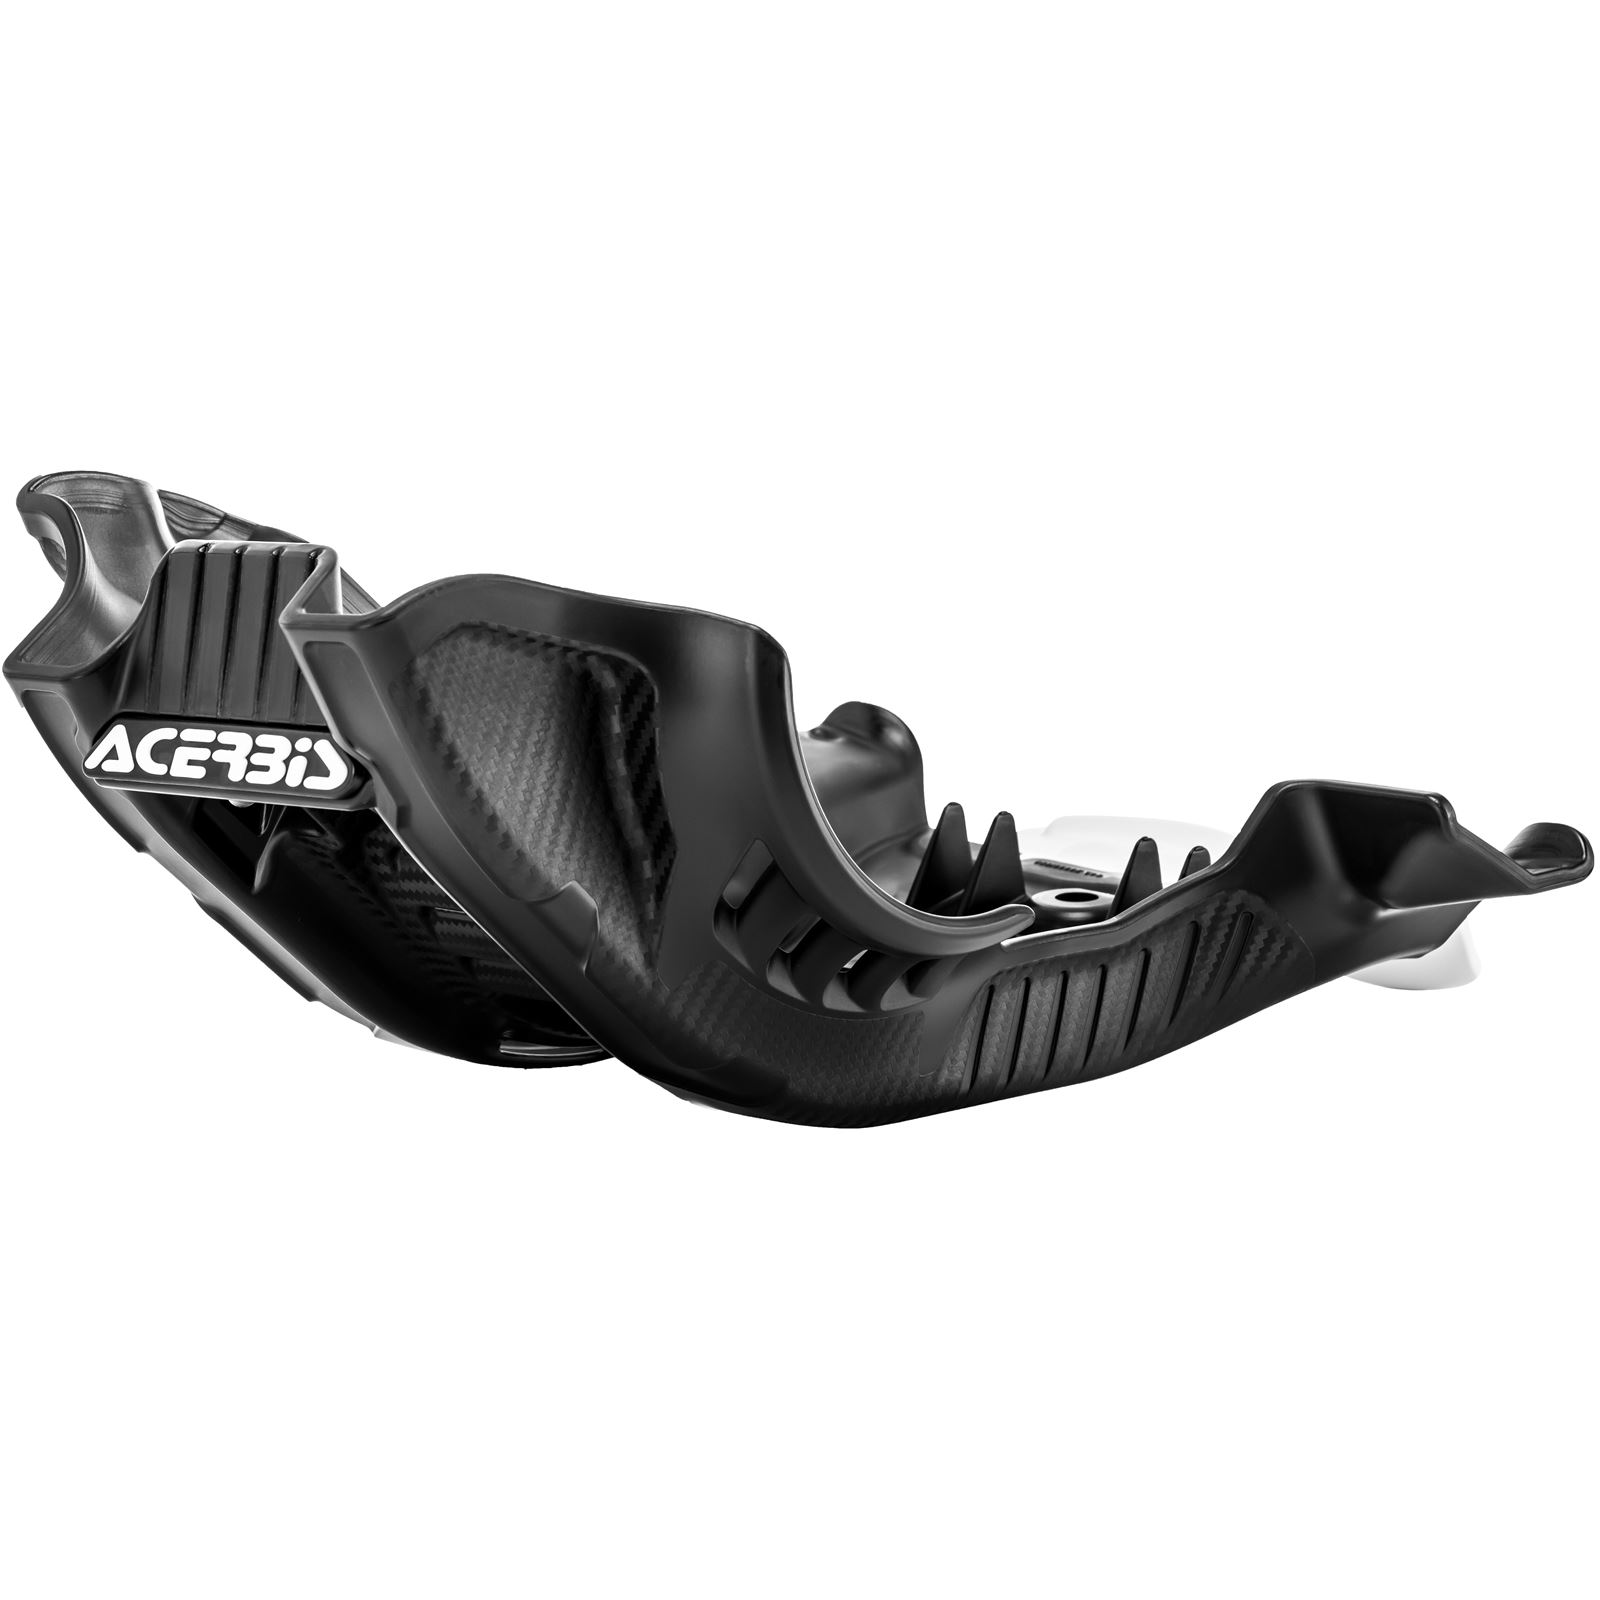 Acerbis Skid Plate w/Linkage Guard